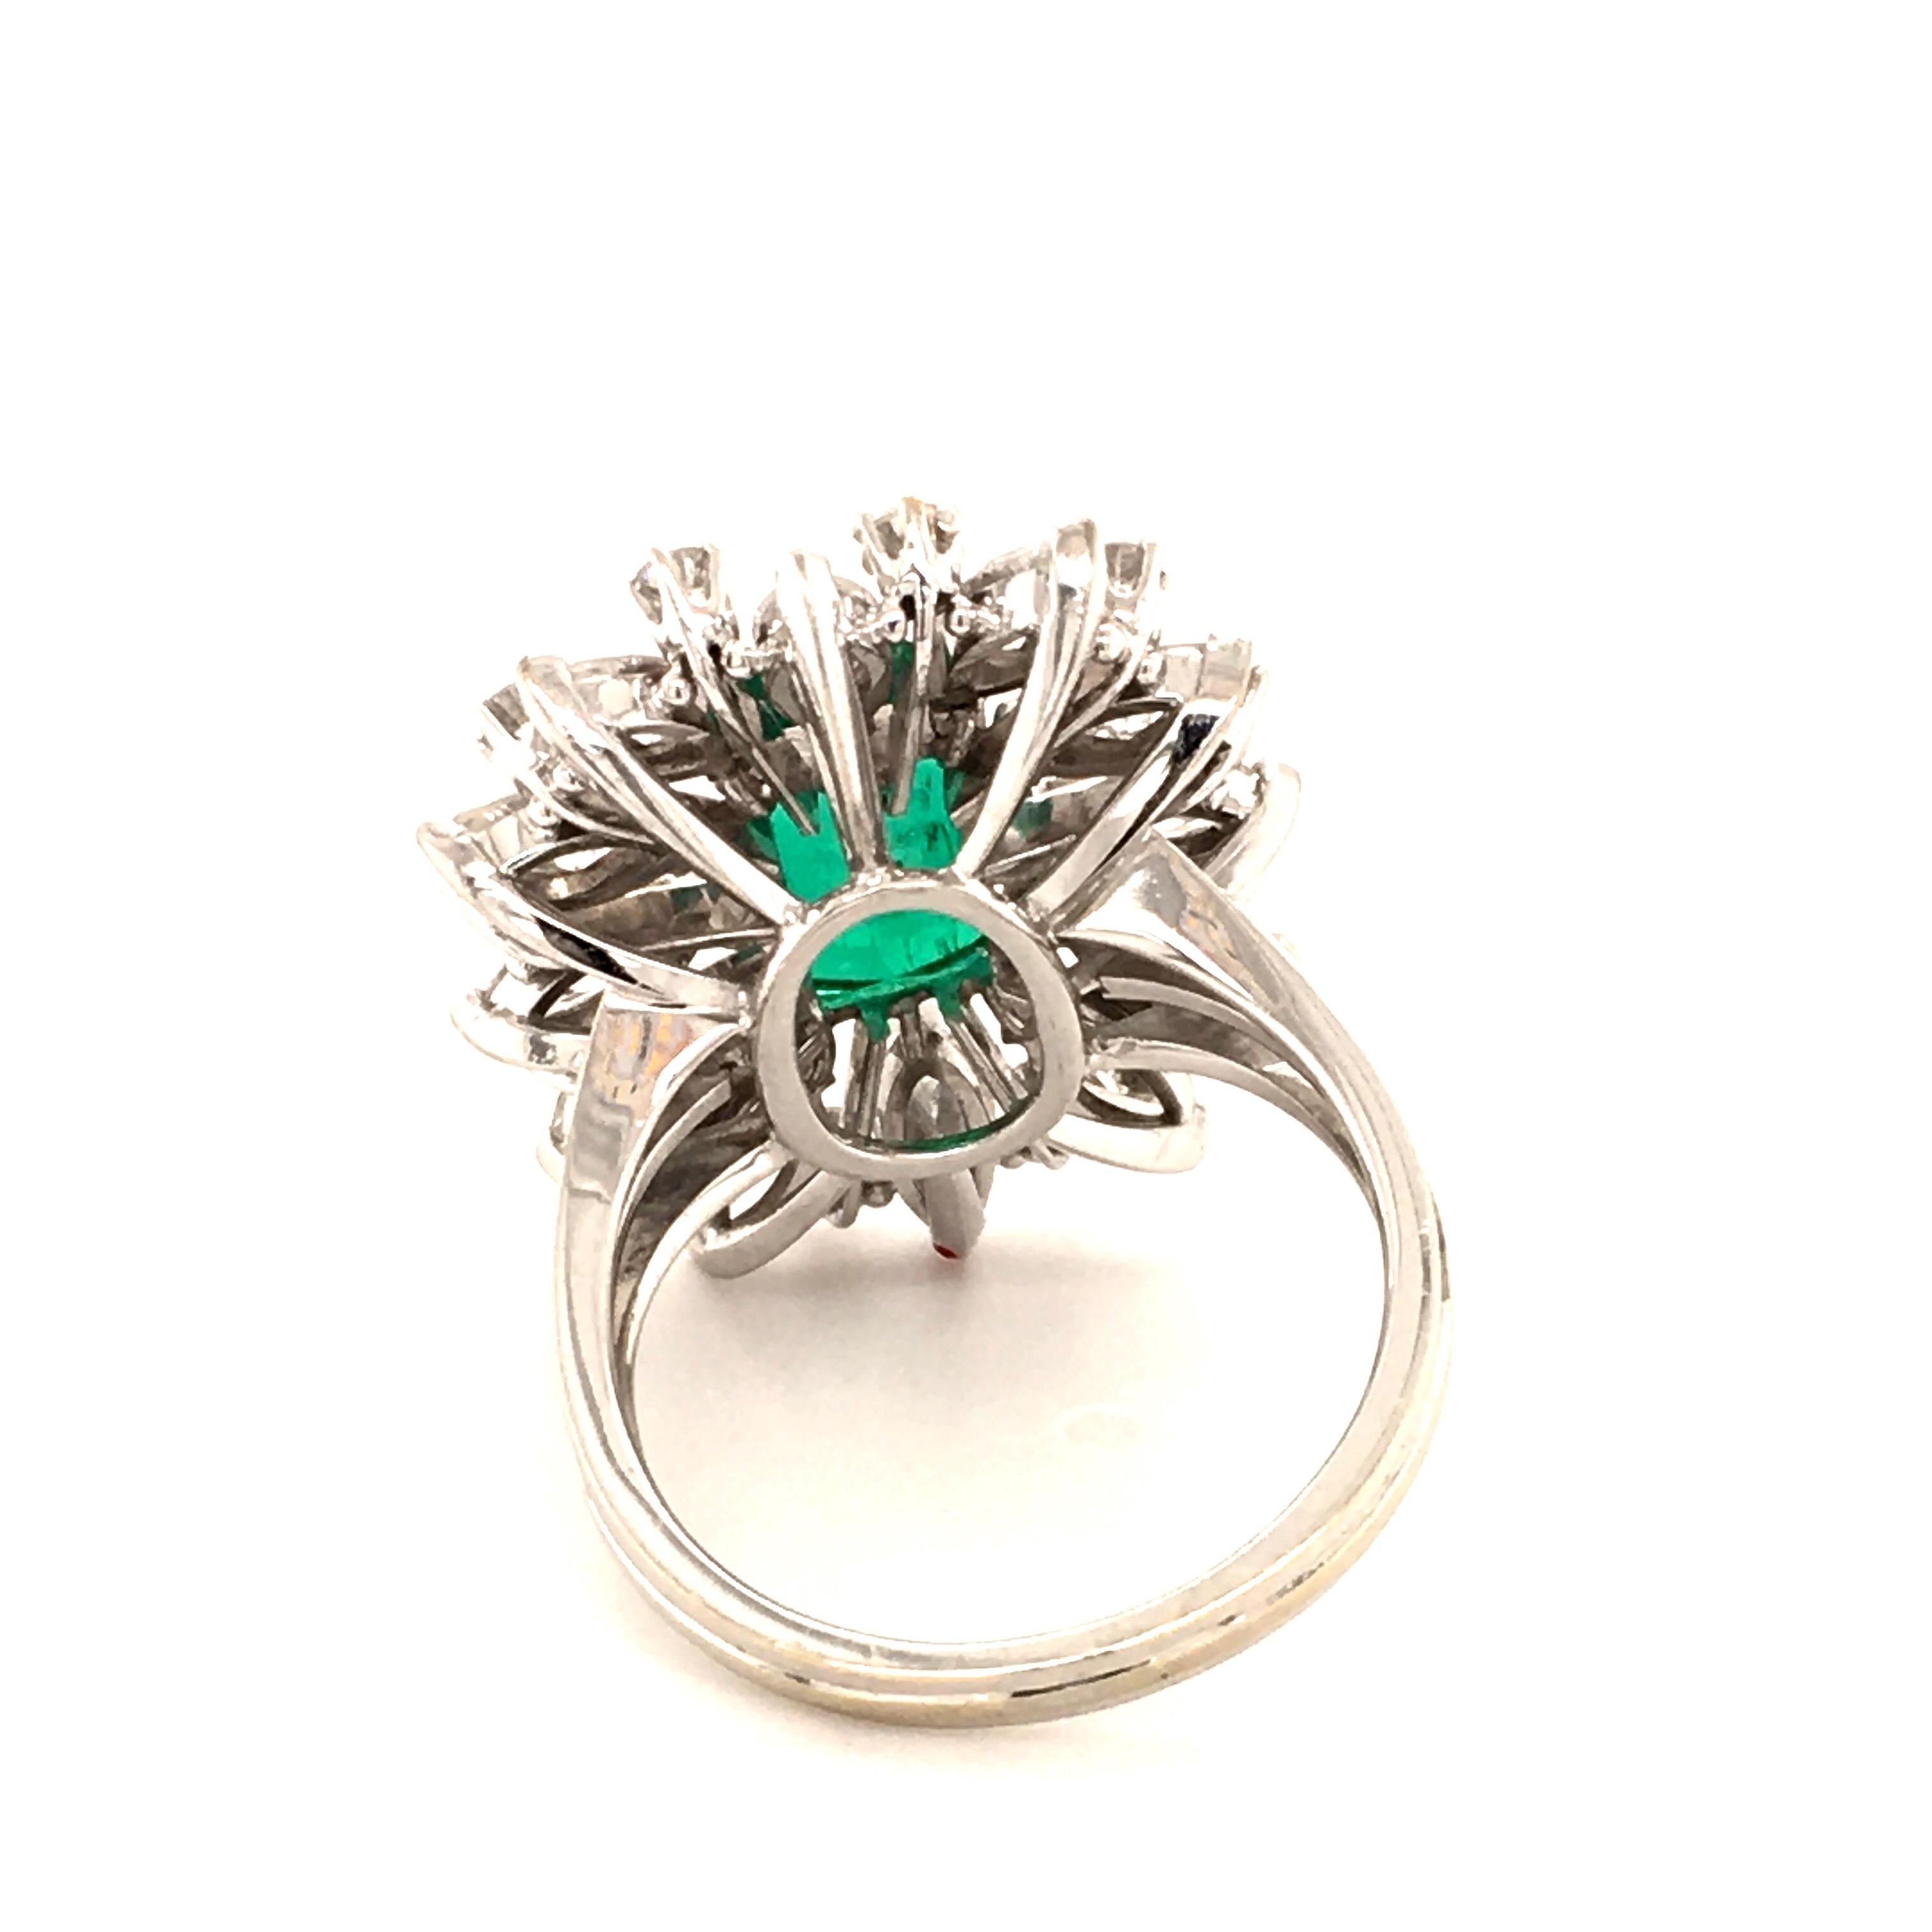 2.25 Carat Colombian Emerald and Diamond Ring in 18 Karat White Gold 3